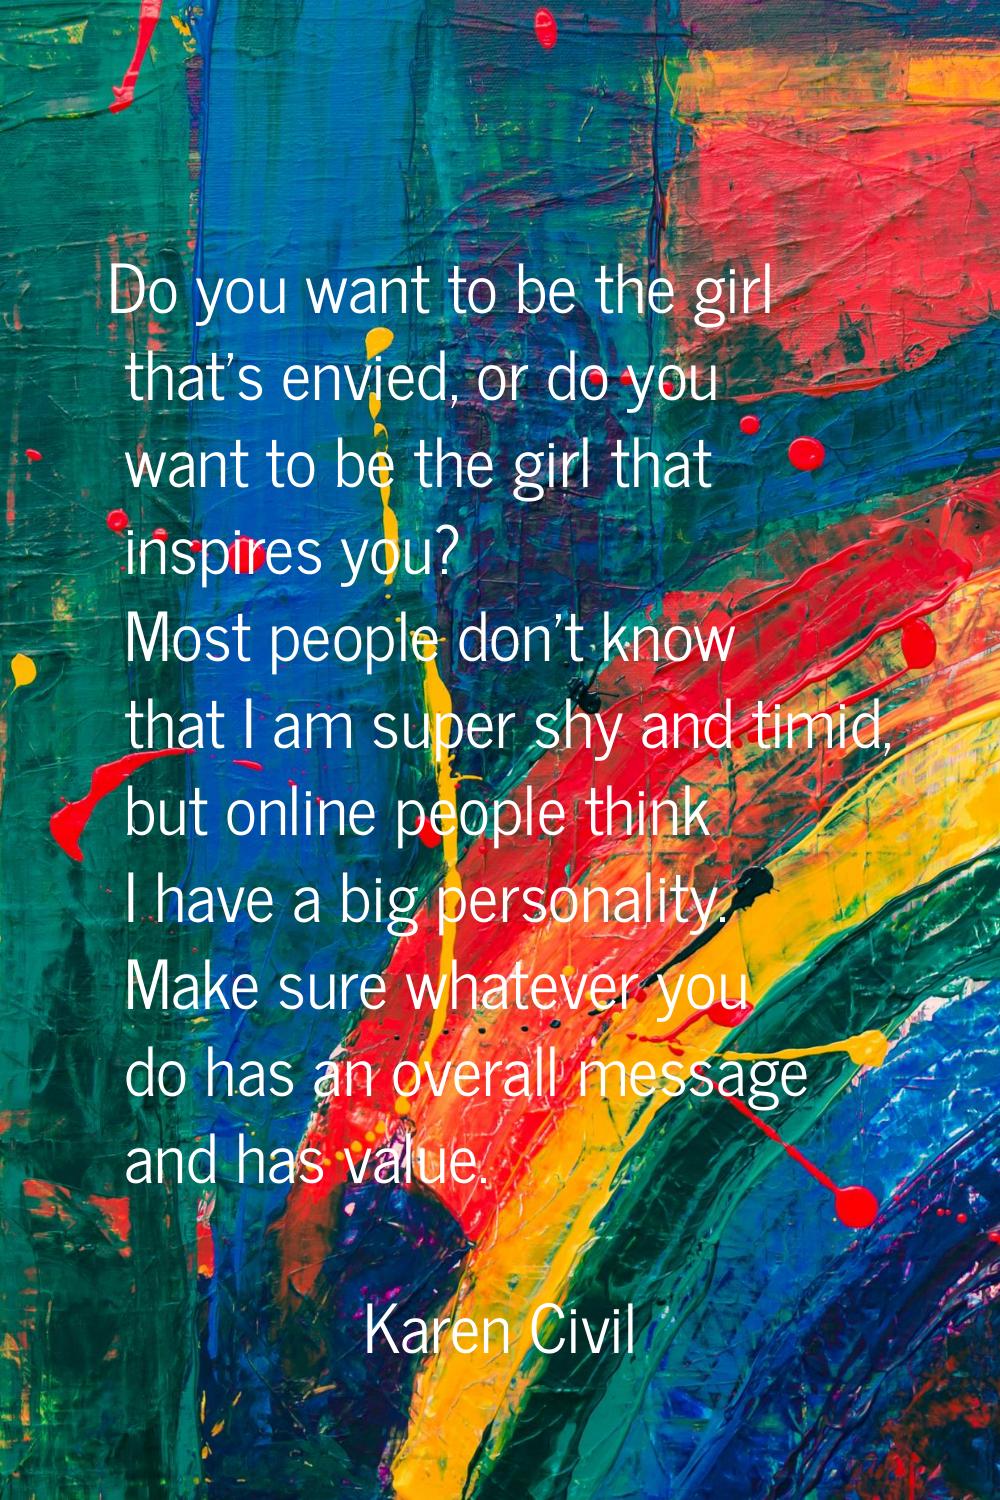 Do you want to be the girl that's envied, or do you want to be the girl that inspires you? Most peo